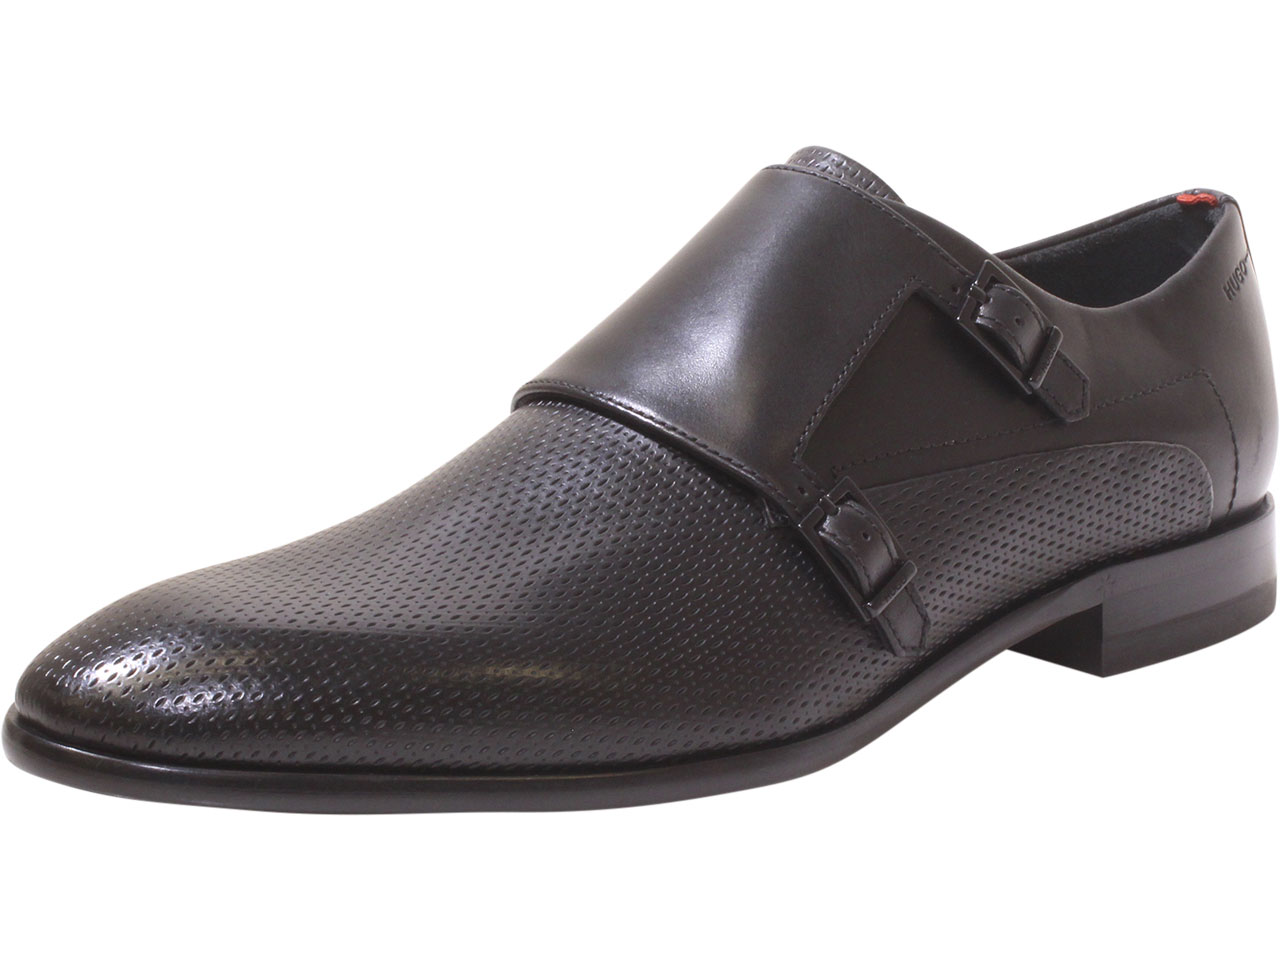 Hugo Boss Men's Appeal Monk Strap Loafers Leather Dress Shoes 